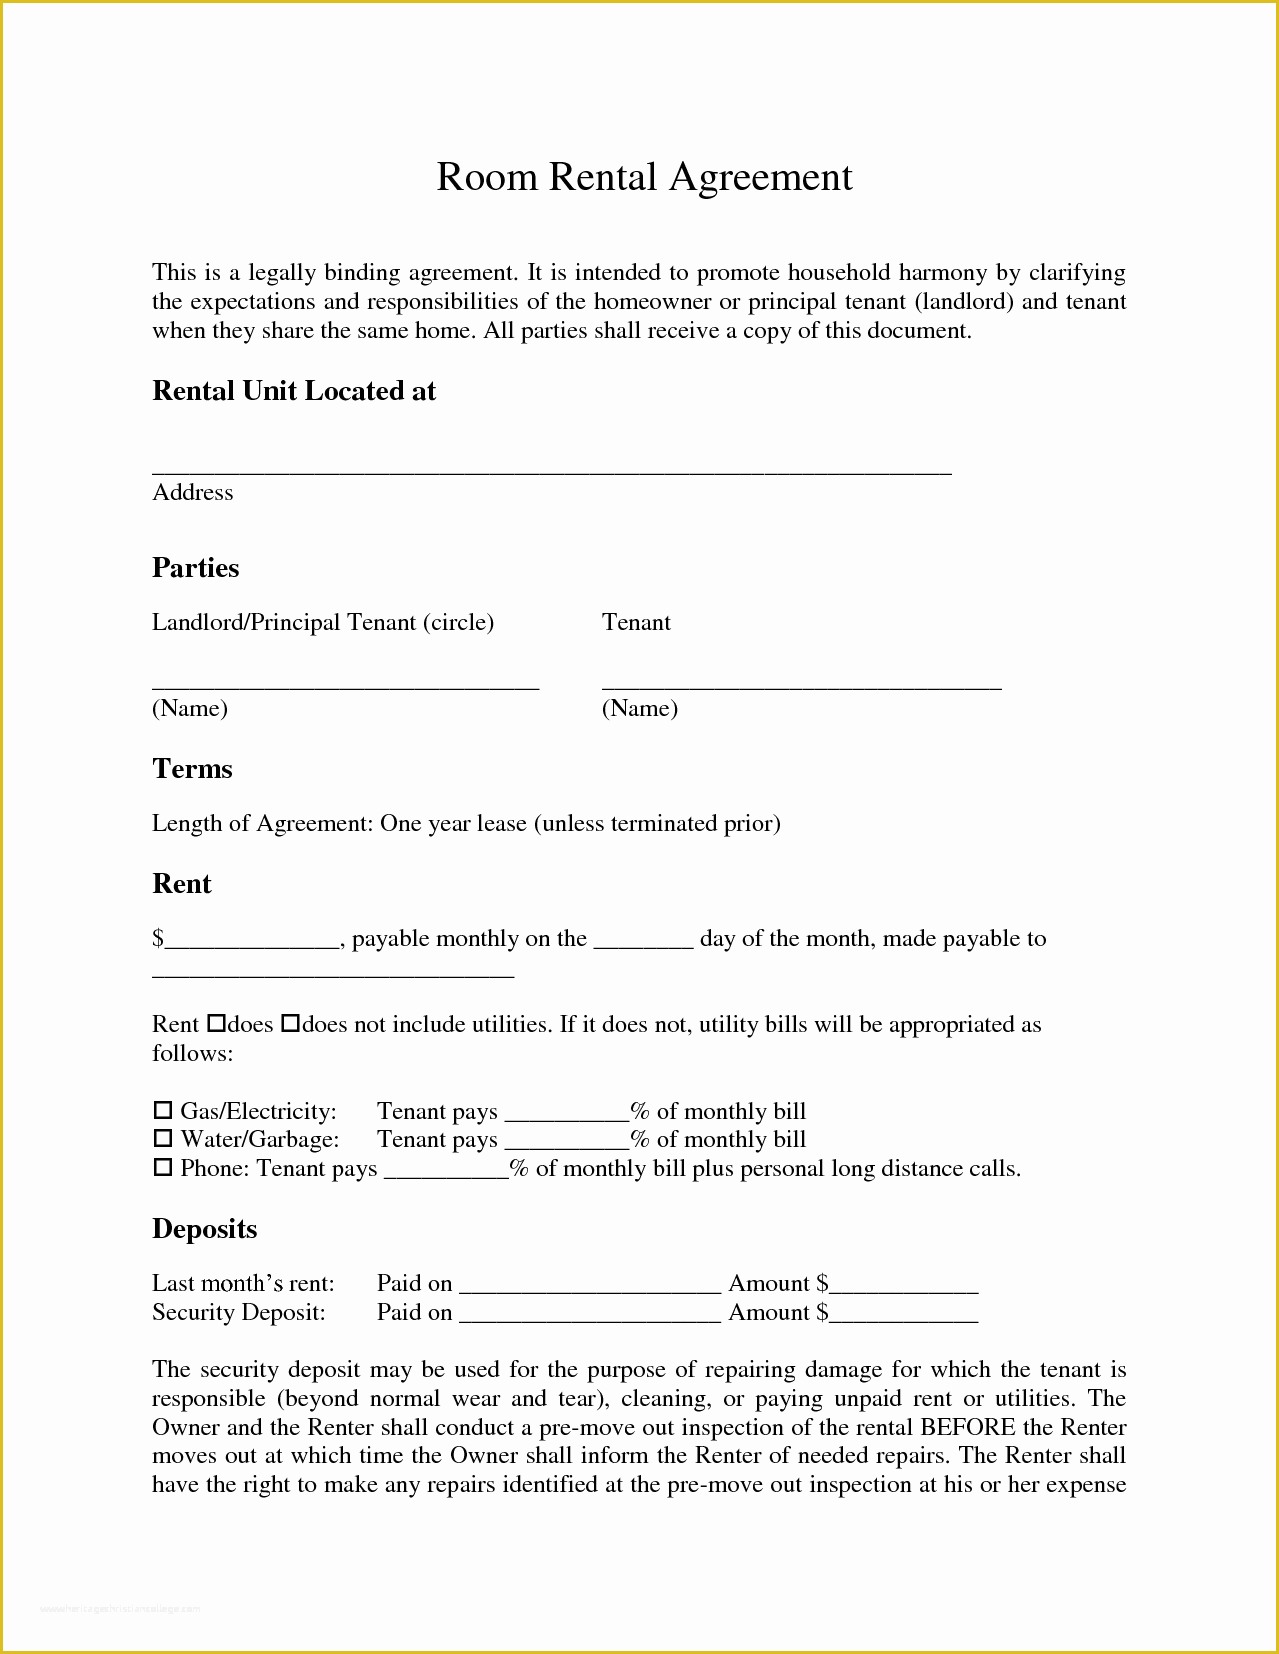 Free Month To Month Rental Agreement Template Of 3 Room Lease Agreement 